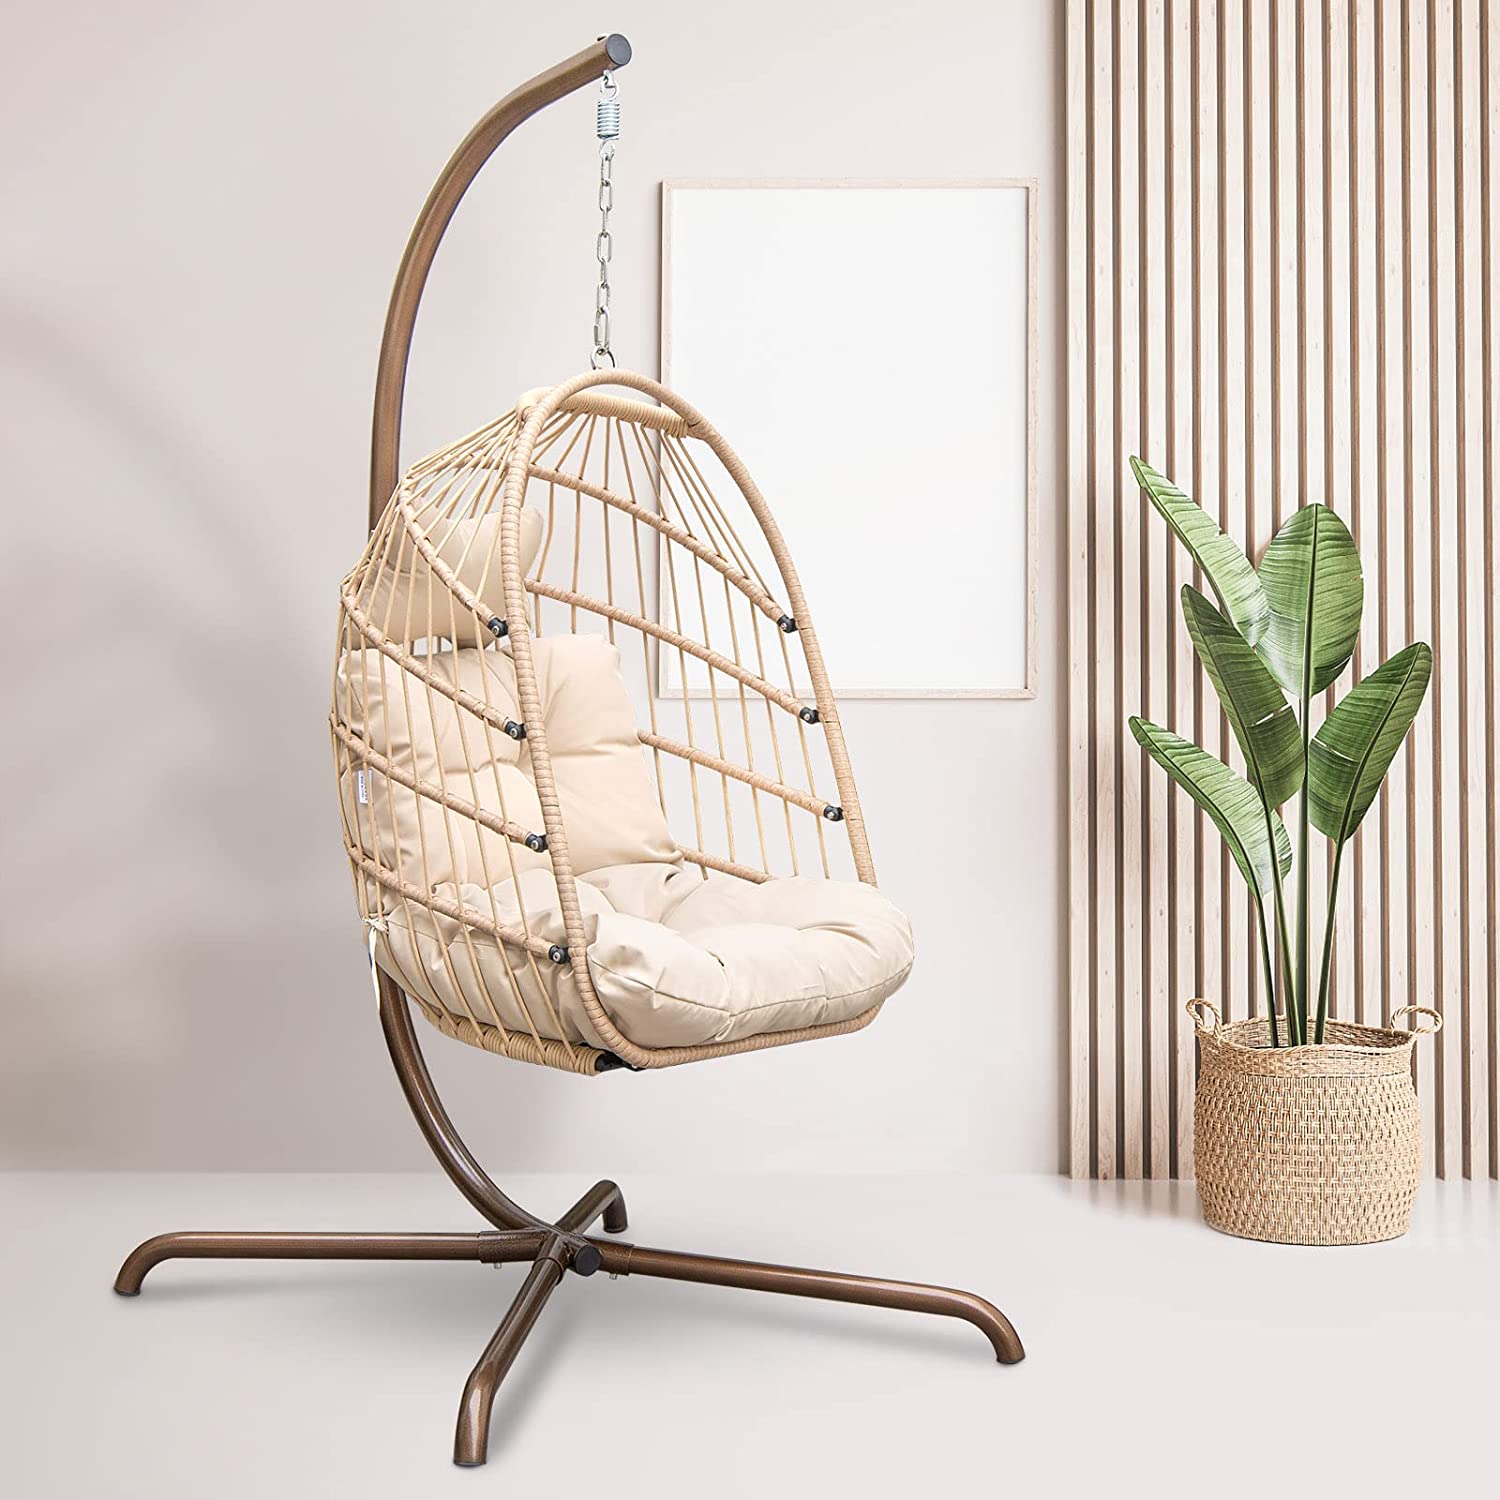 Rattan Wicker Hanging Hammock Egg Swing Chair with Stand for Indoor and Outdoor